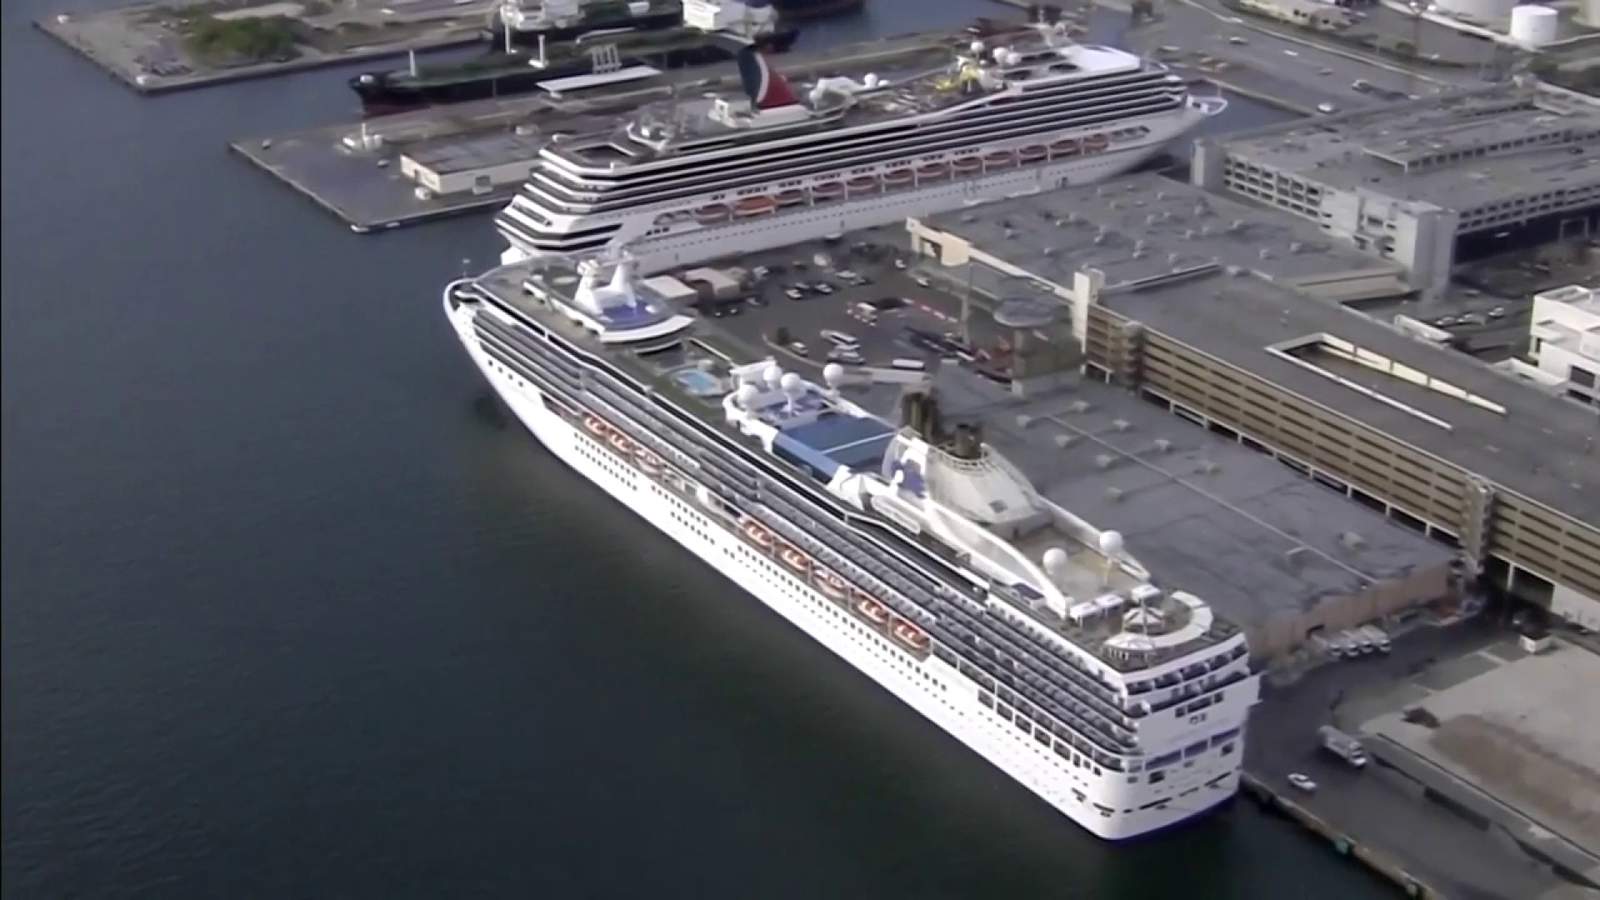 Gov. announces Florida’s lawsuit against federal government, CDC over cruise restrictions